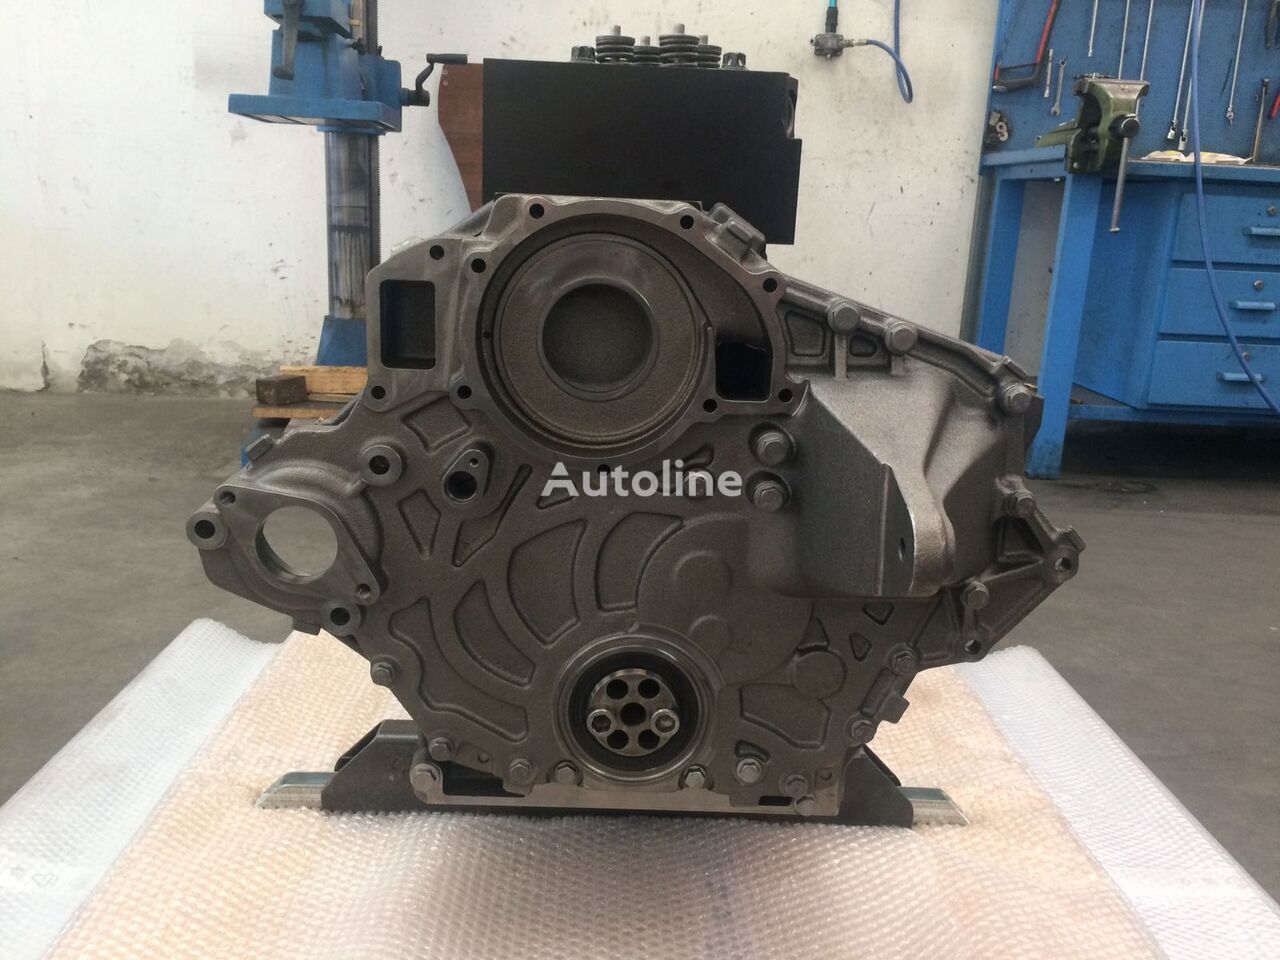 Engine for Bus MAN MOTORE D0836LUH41 - 240CV - EURO 3 - BUS - Orizzontale: picture 3